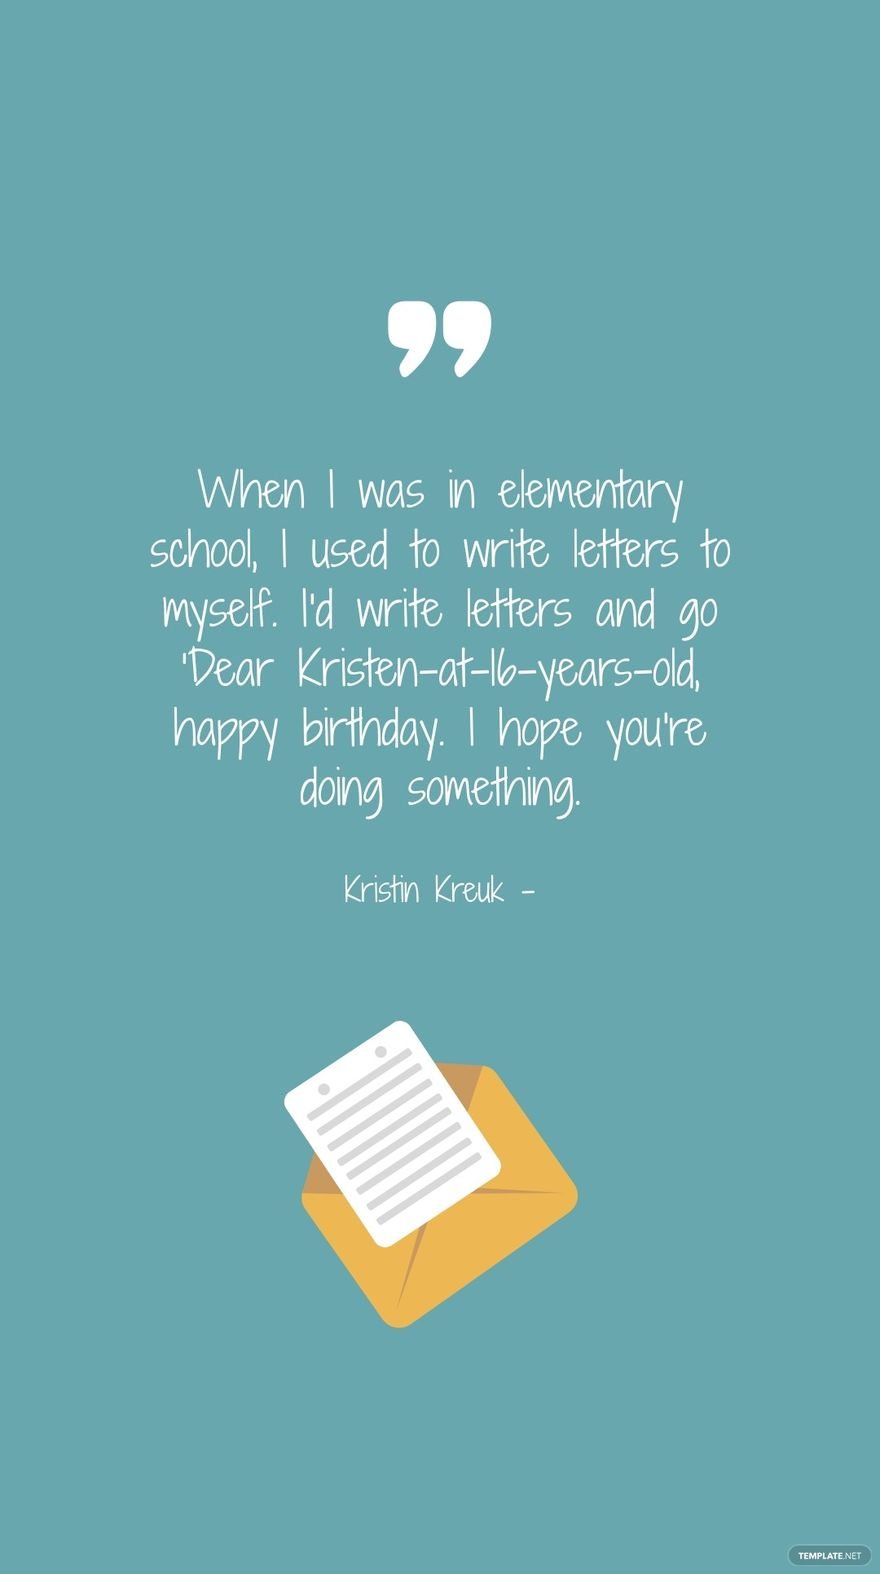 Kristin Kreuk - When I was in elementary school, I used to write letters to myself. I'd write letters and go 'Dear Kristen-at-16-years-old, happy birthday. I hope you're doing something.